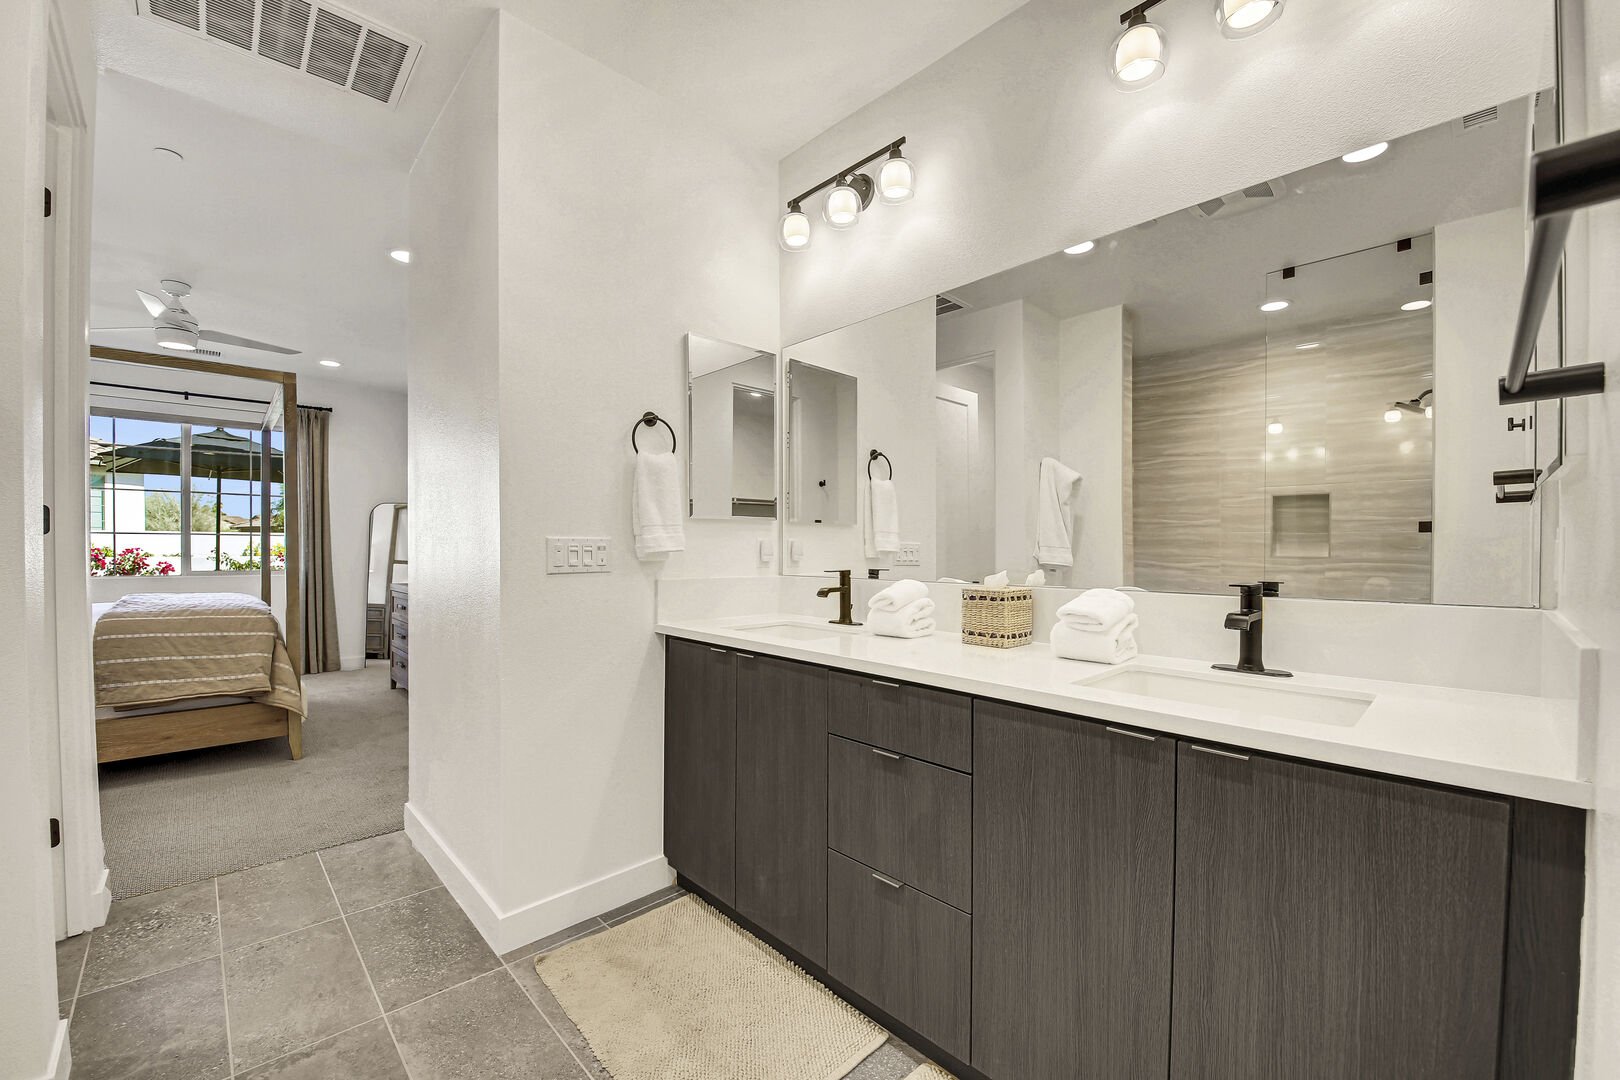 The private en suite bathroom features a large tile shower and double vanity sinks.